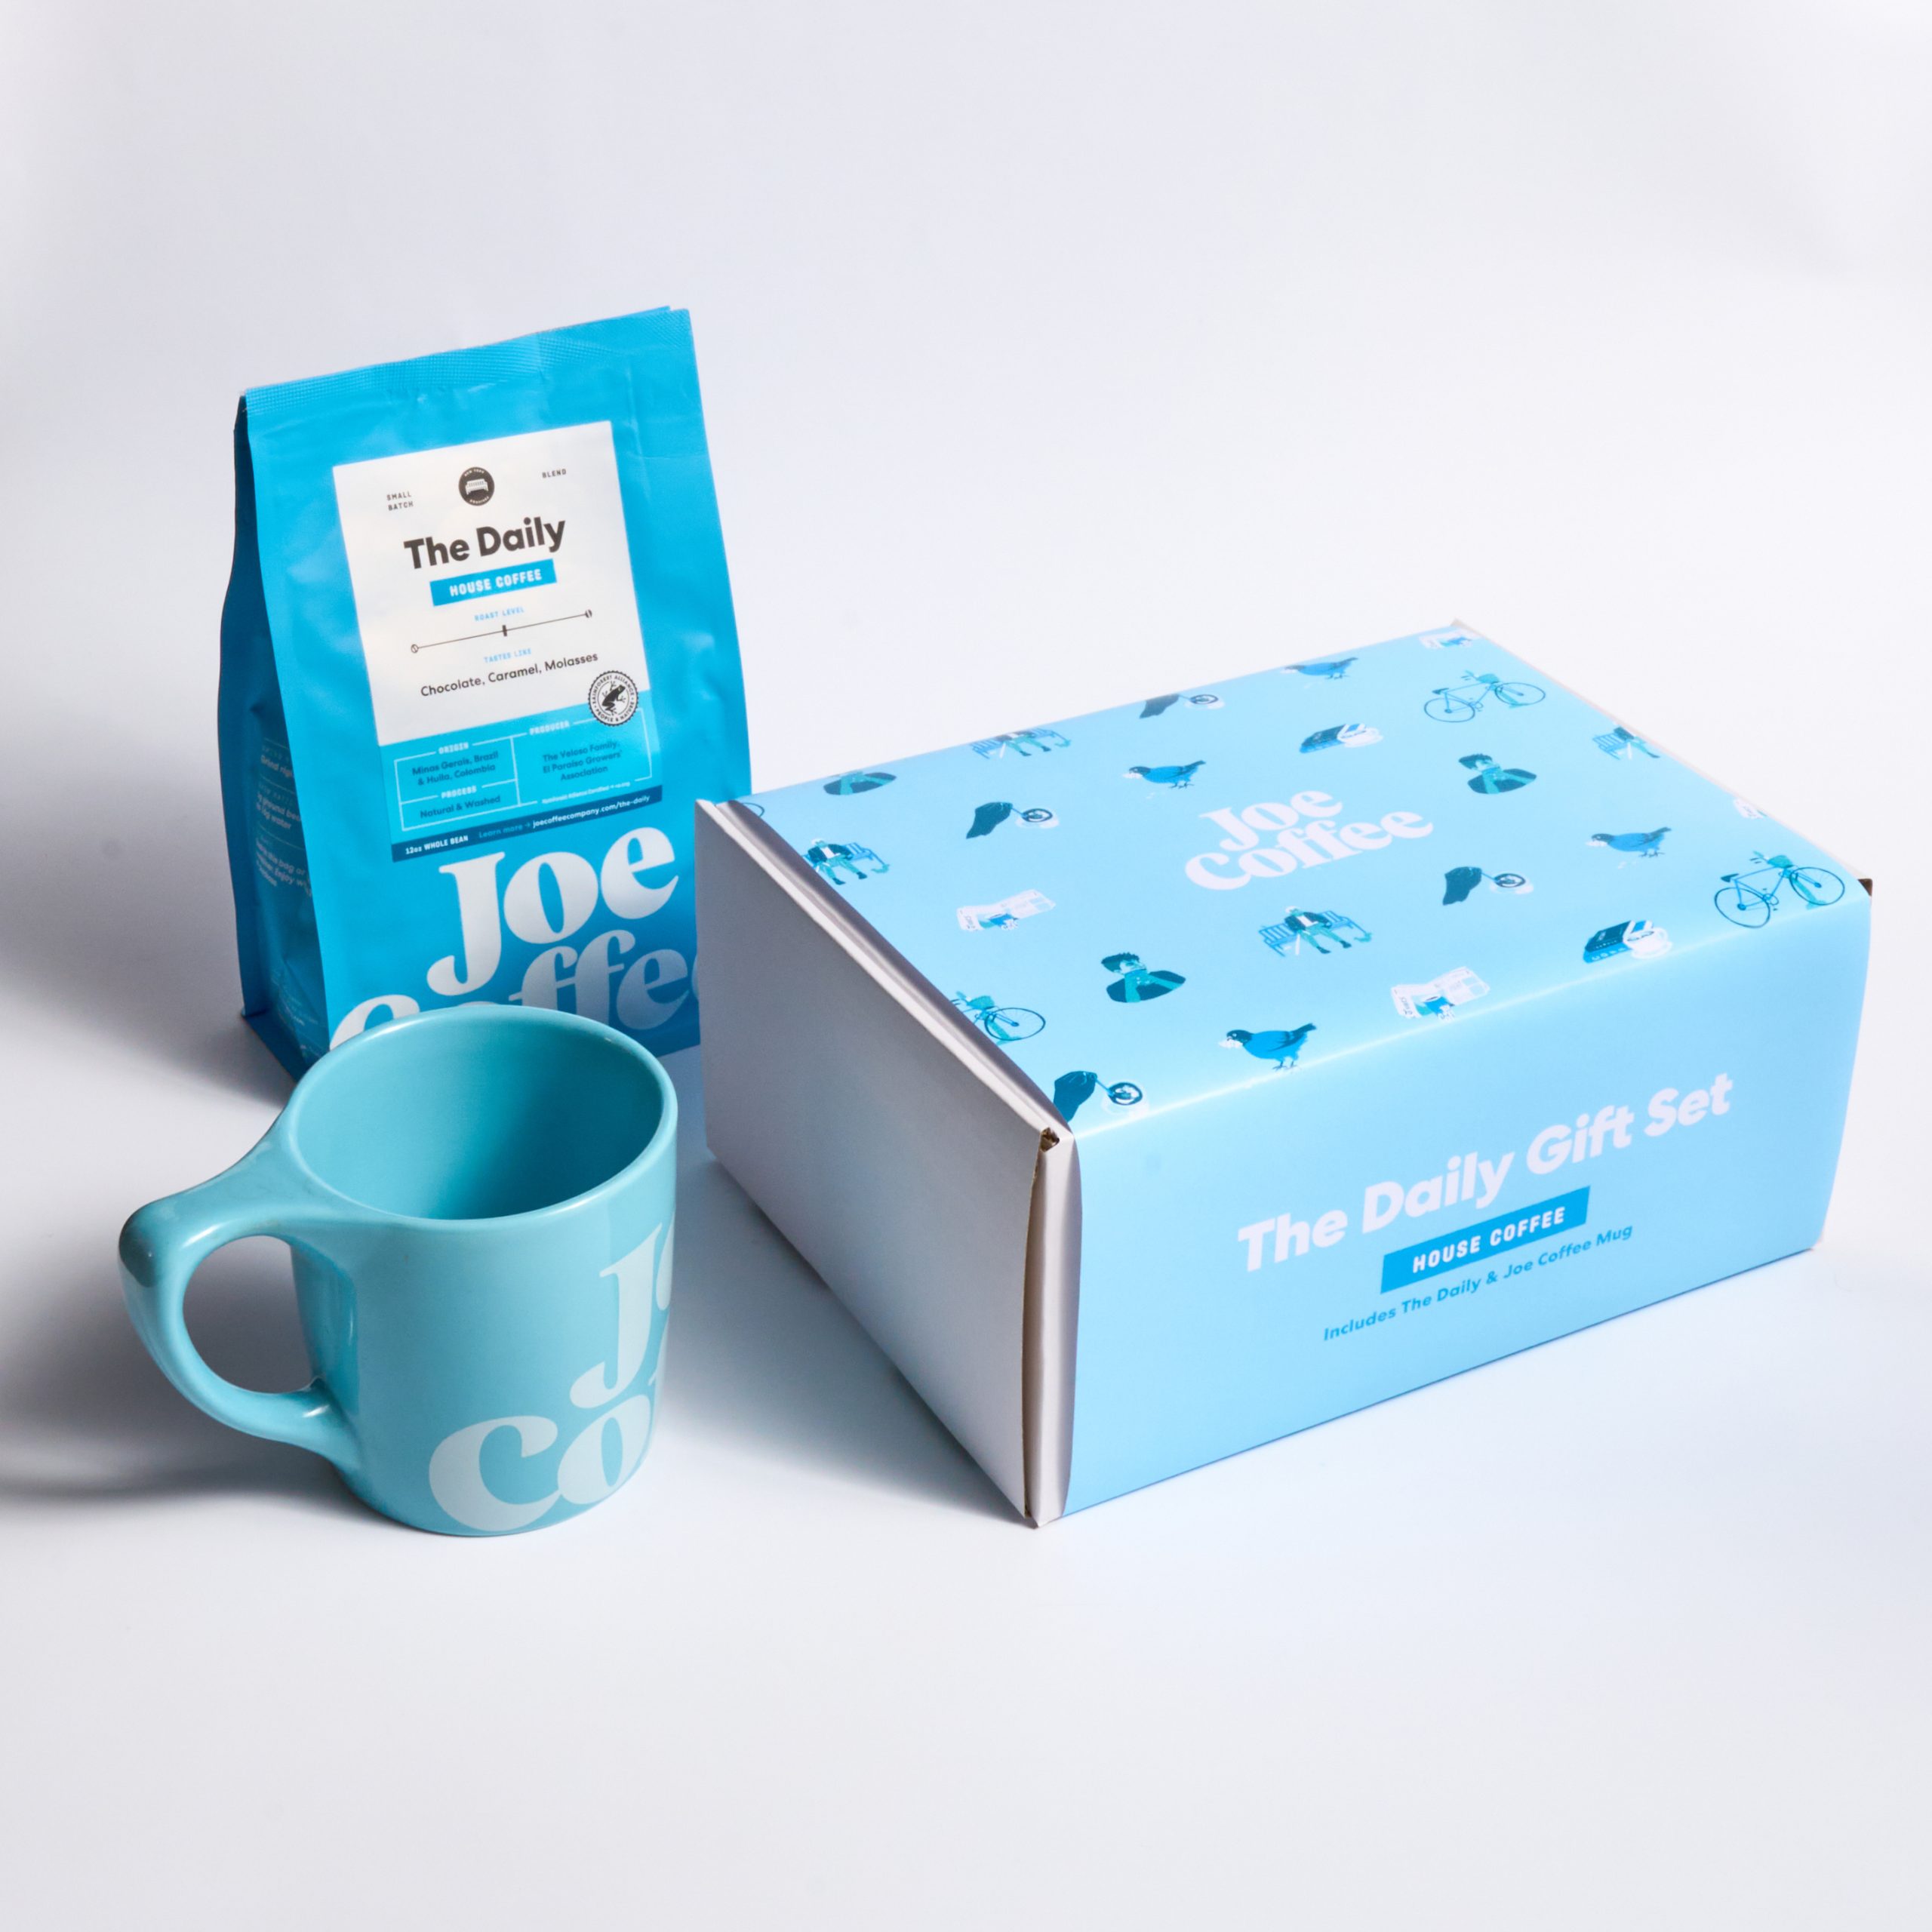 The Daily Gift Set pictured with a bag of The Daily and a Joe Coffee mug